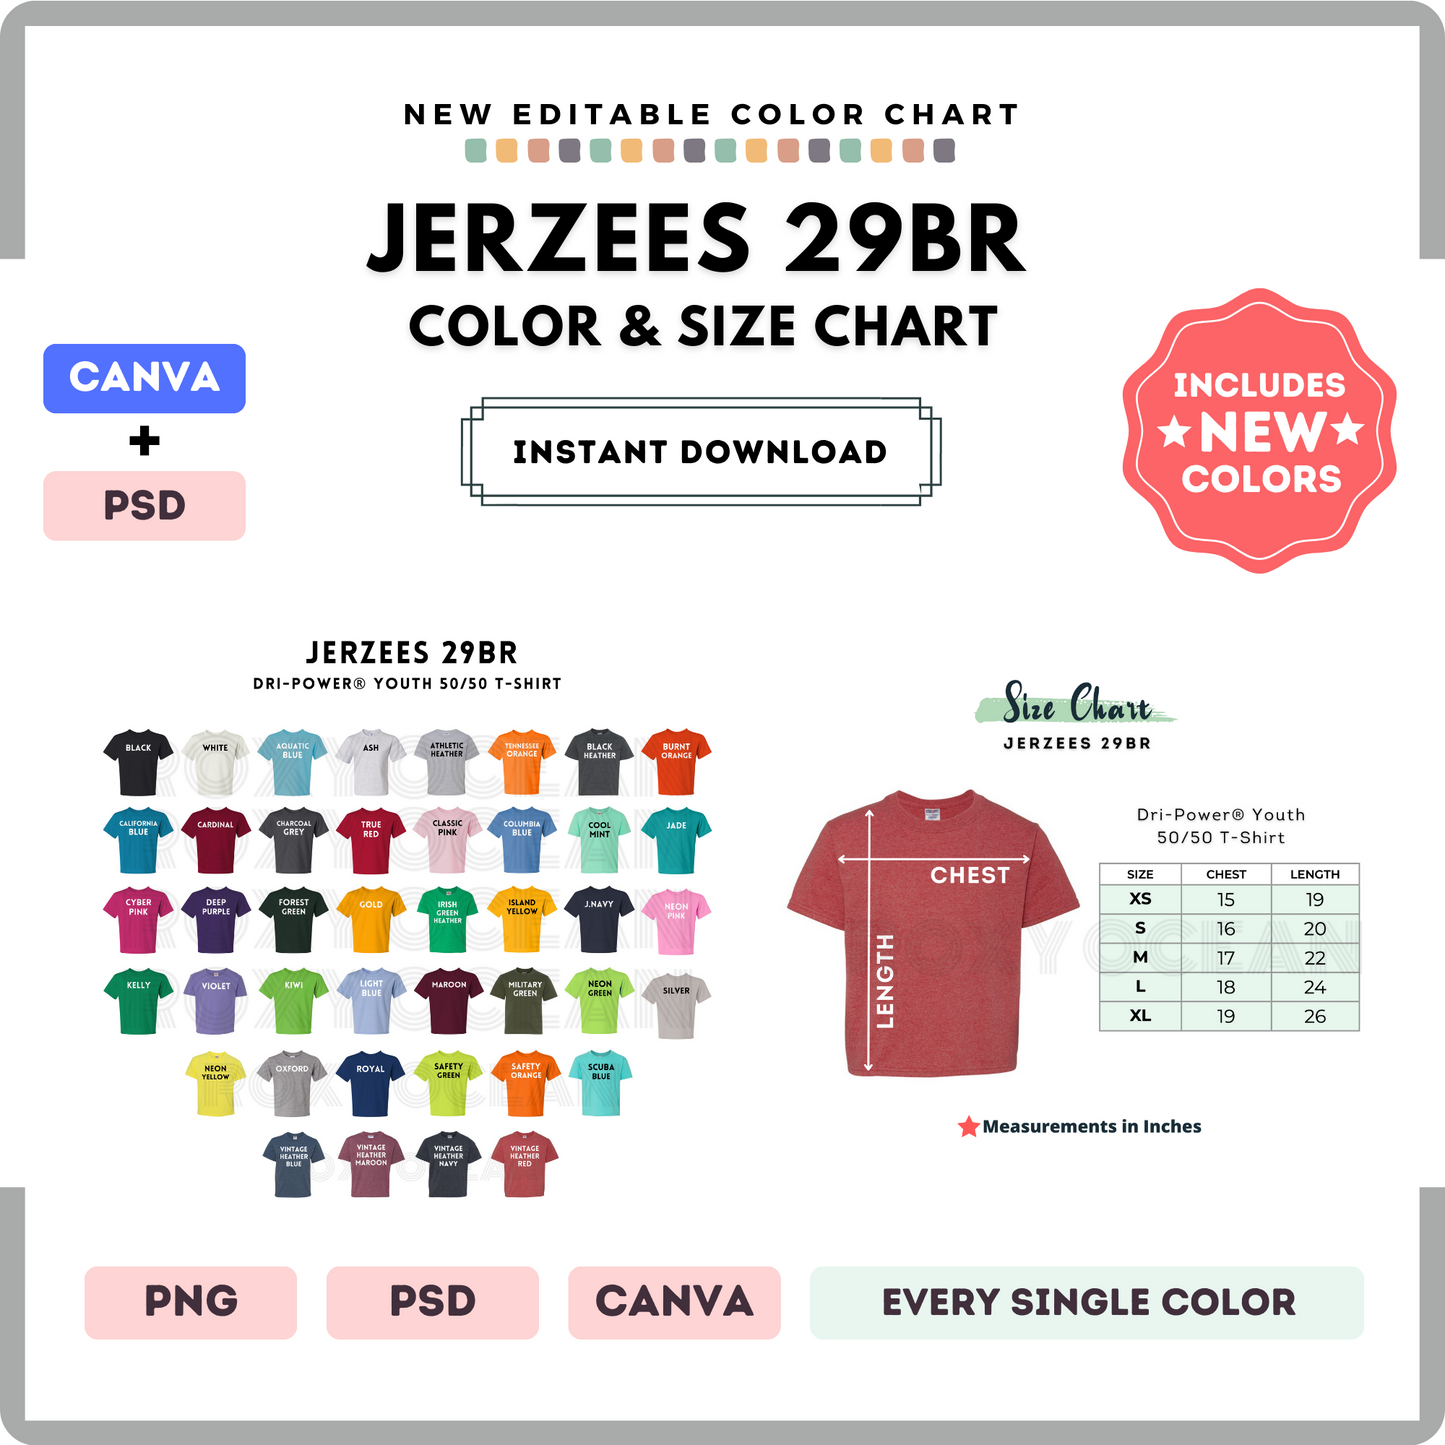 Jerzees 29BR Color and Size Chart